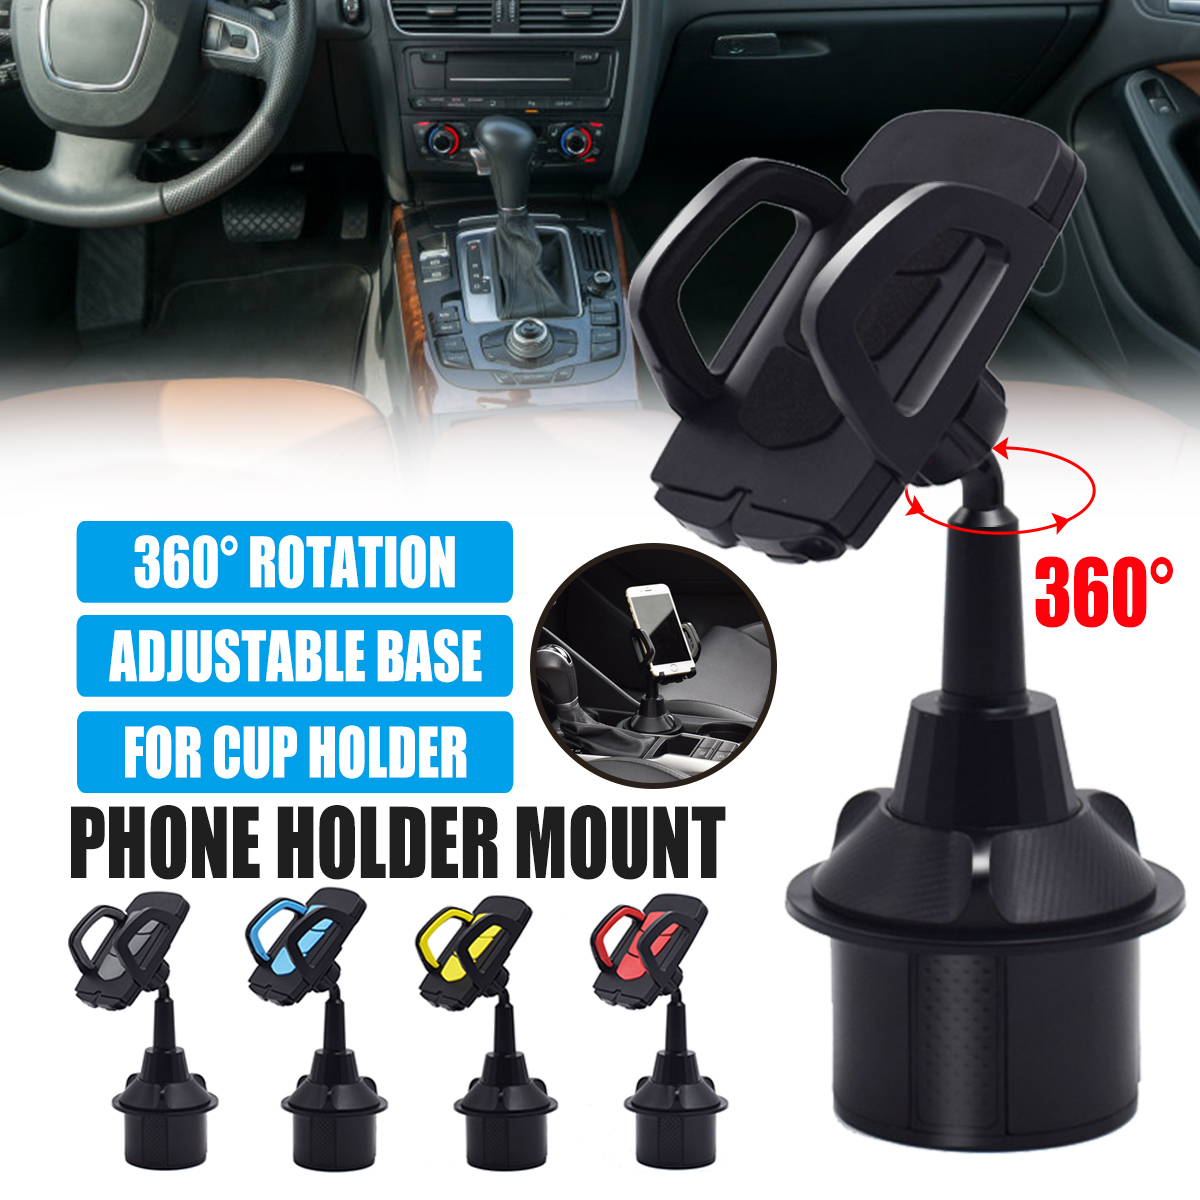 Universal-360-Rotation-Car-Phone-Mount-Gooseneck-Cup-Holder-for-5-95cm-Width-Cell-Phone-for-iPhone-1-1720314-2